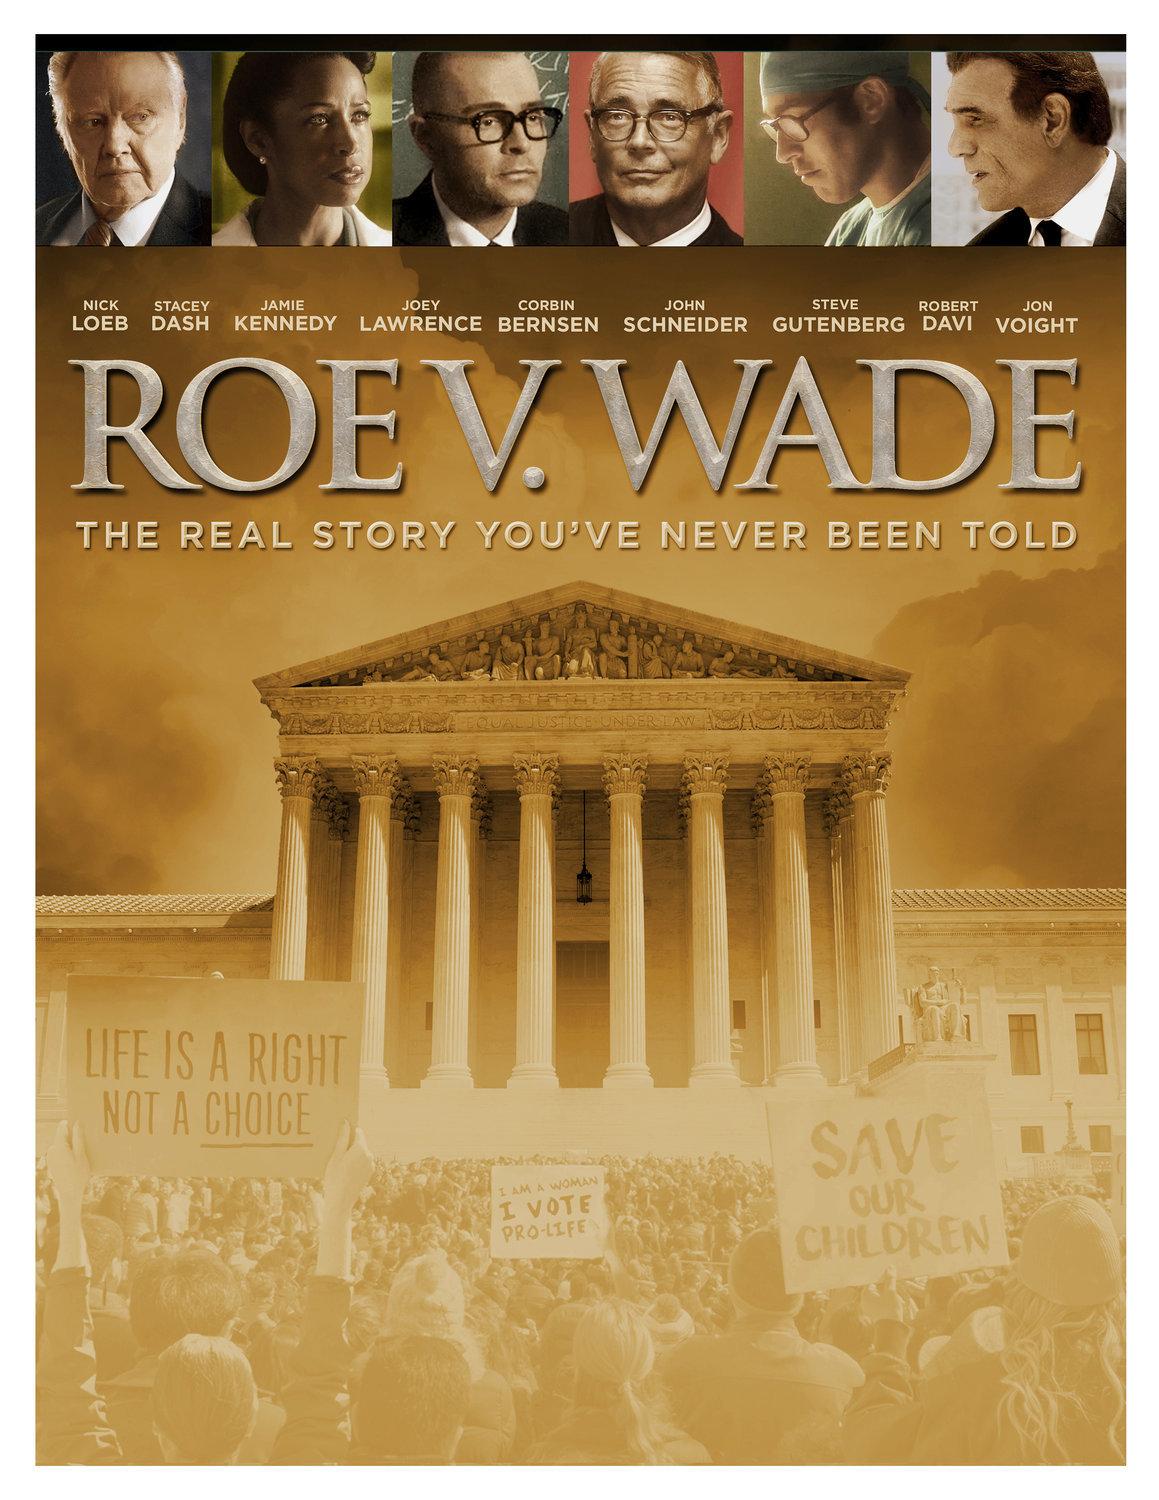 The Rhode Island premiere of the film “Roe v. Wade” will take place on Thursday, May 6 at McVinney Auditorium. Doors open at 6 p.m. and the movie begins at 7 p.m.